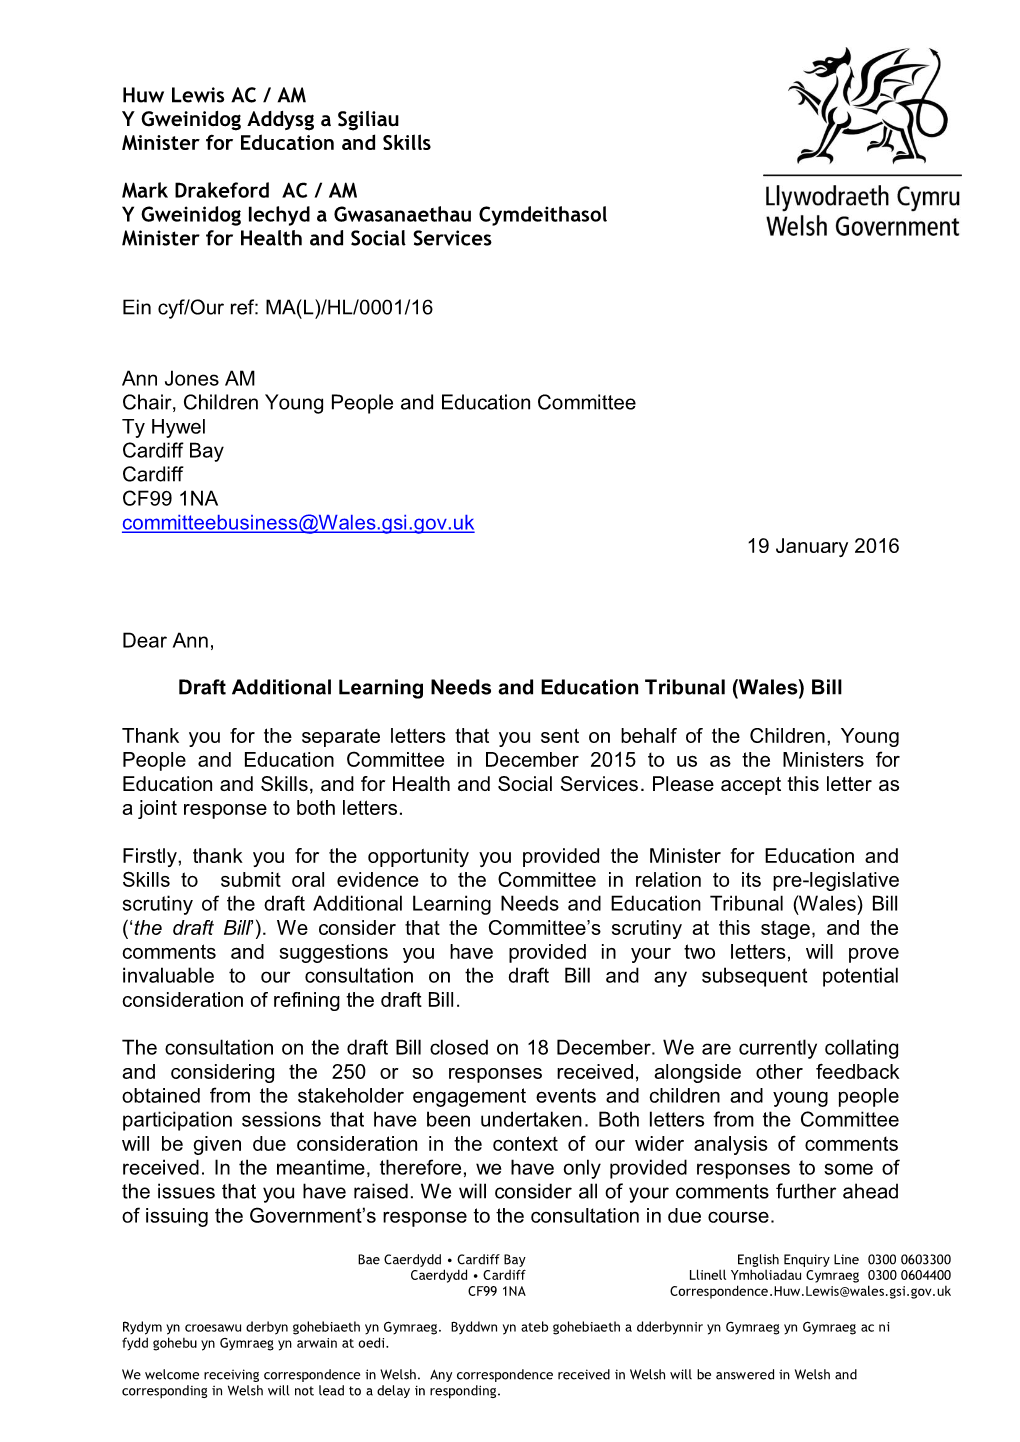 Letter from the Minister for Education and Skills and the Minister For